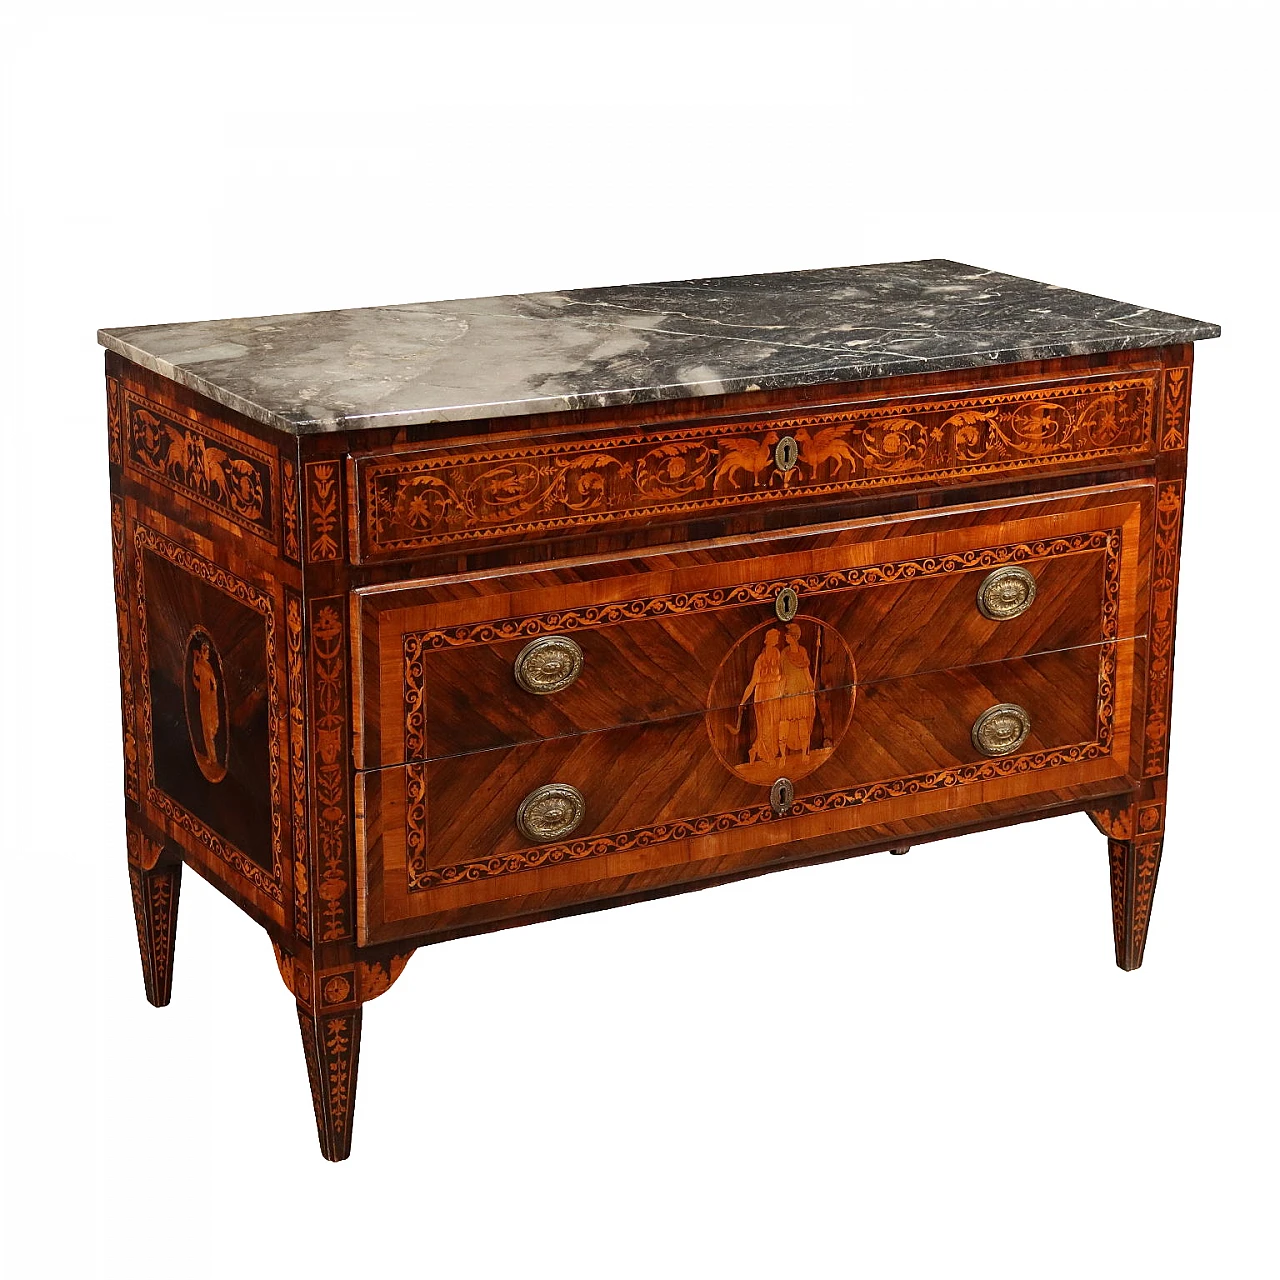 Louis XVI chest of drawers in inlaid wood with marble top, late 18th century 1